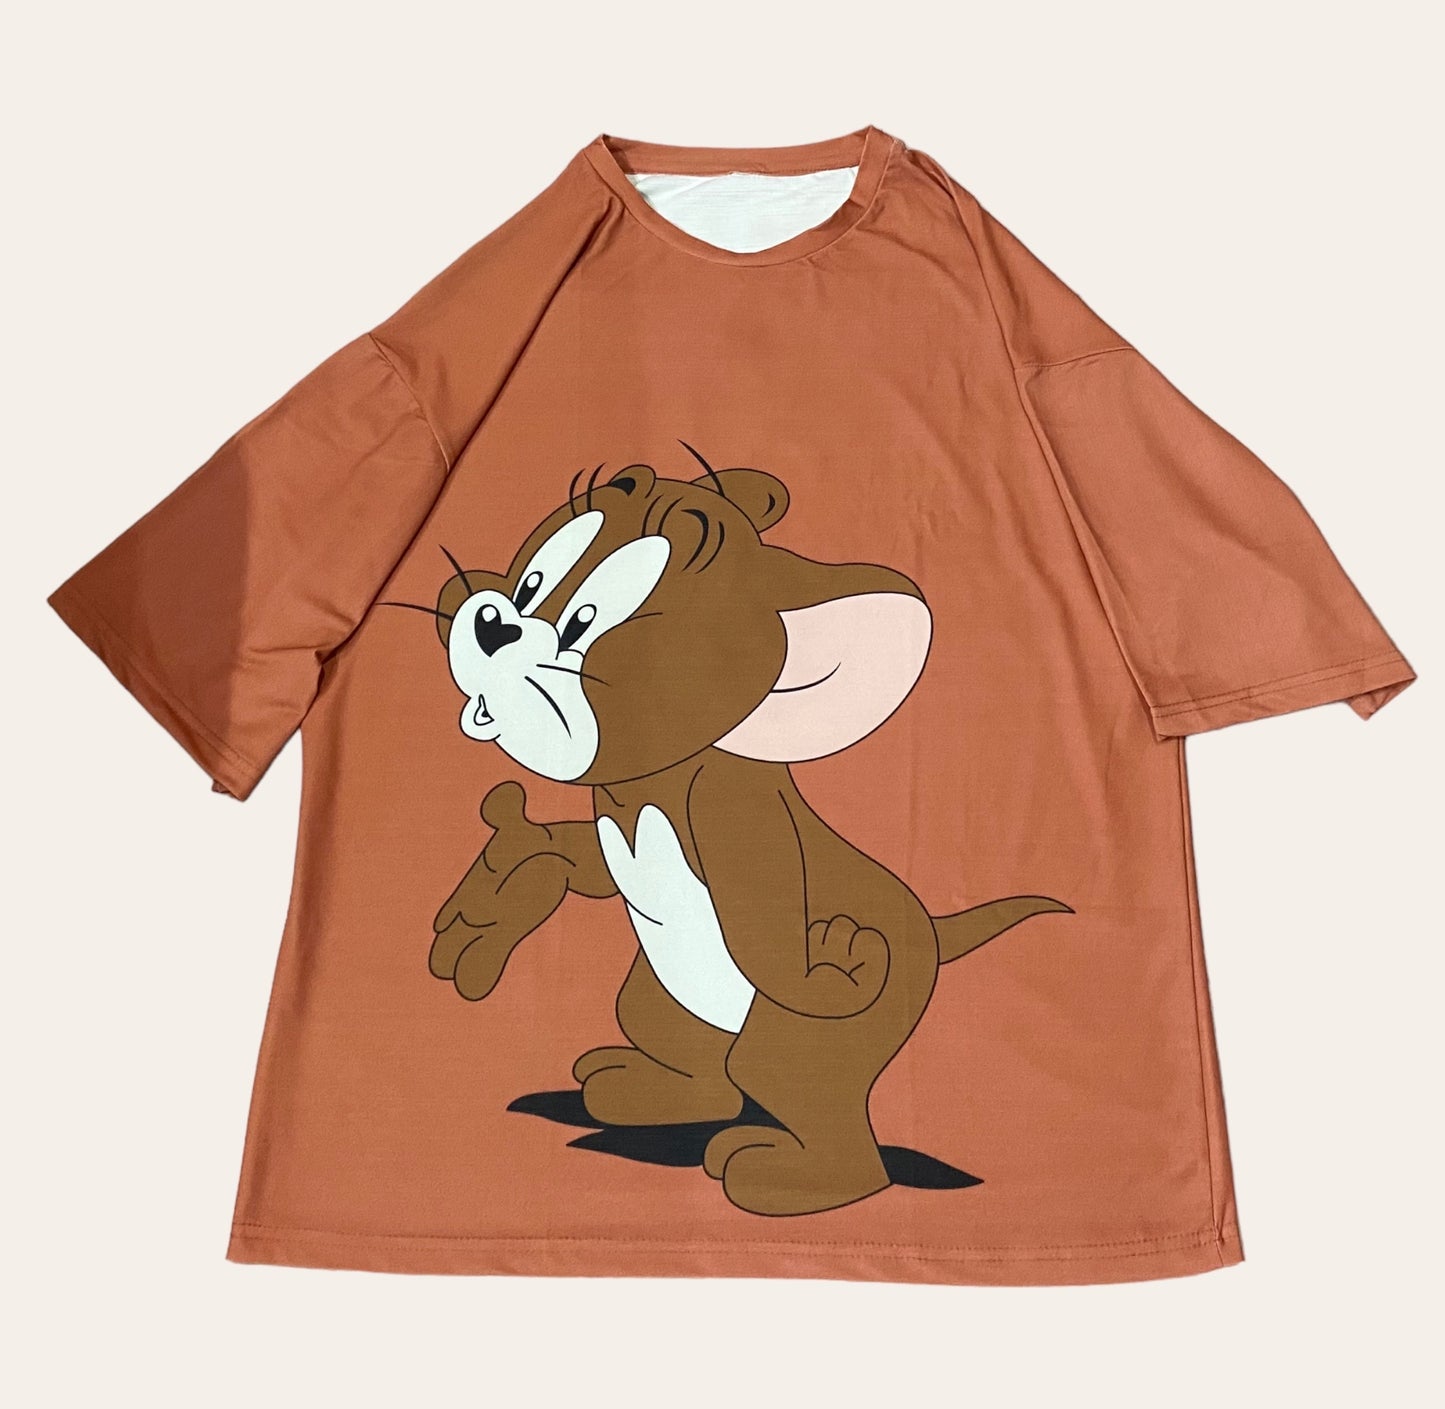 ‘Tom and jerry’ oversized tee